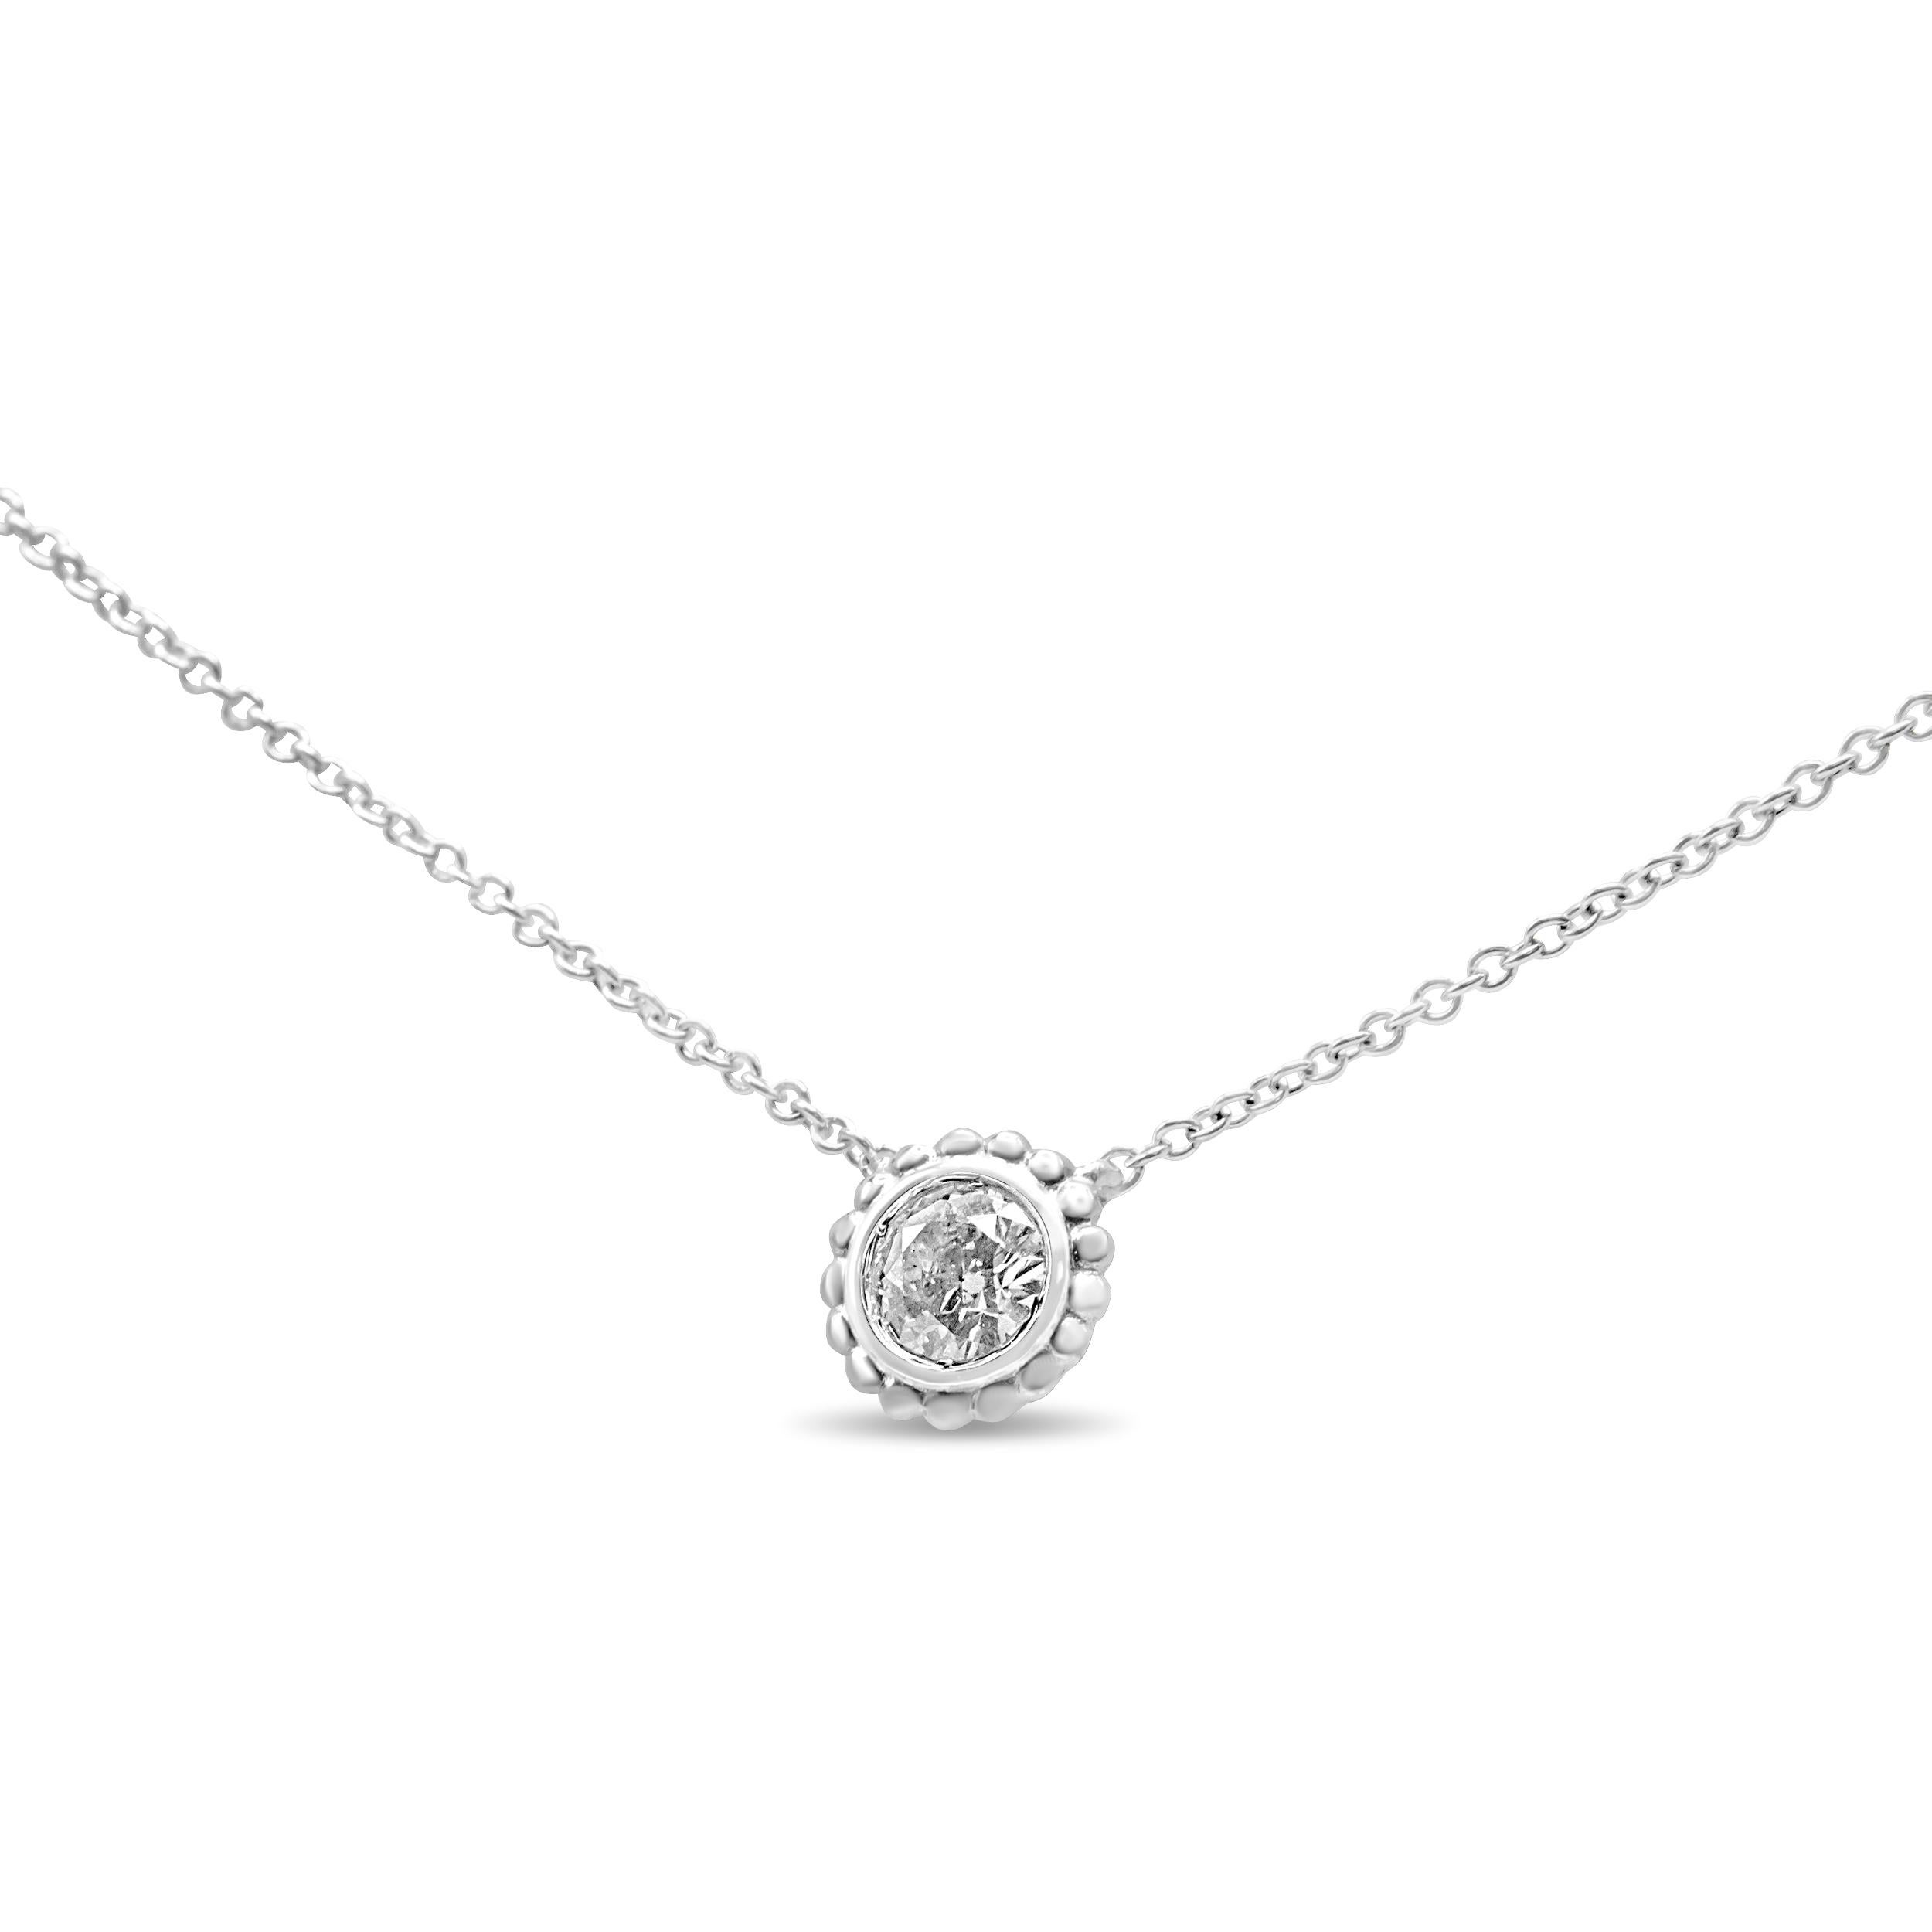 Masterfully set in a unique motif, this diamond solitaire pendant necklace takes on a sweet design with the 10k white gold forming a budding floral-silhouette that halos the singular center stone. The centerpiece of this sweet and simple motif is